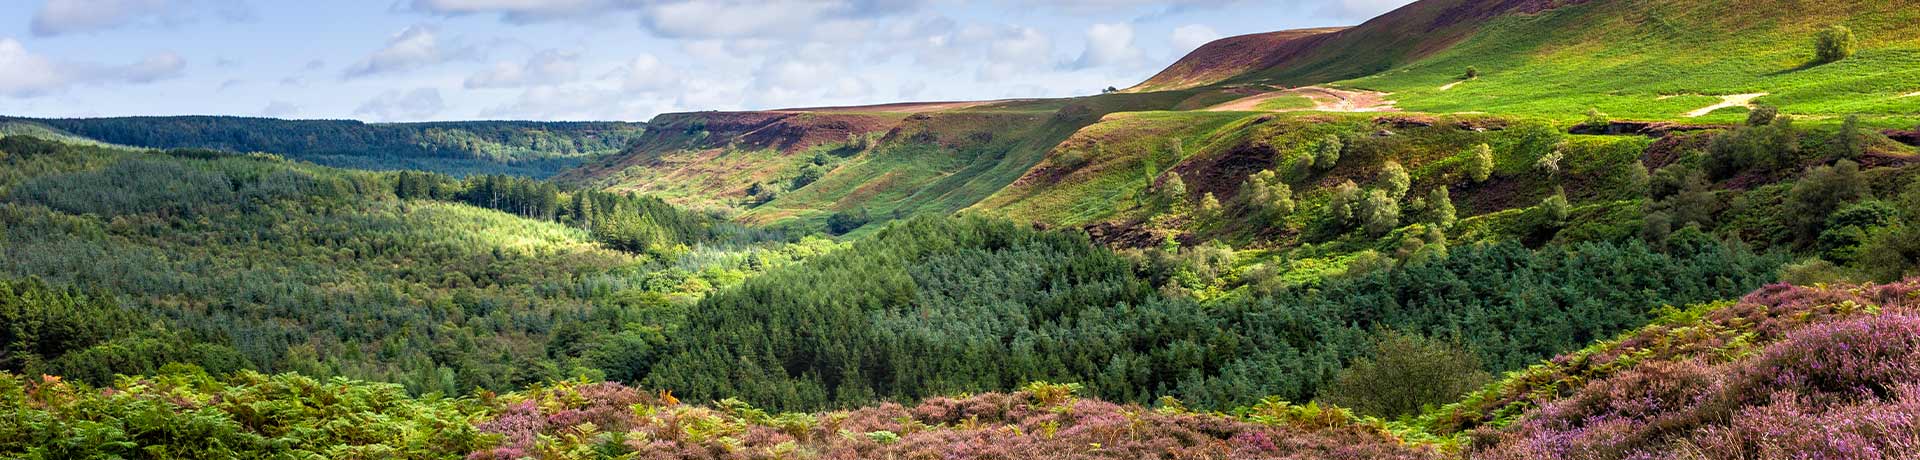 Most beautiful places to visit in Yorkshire